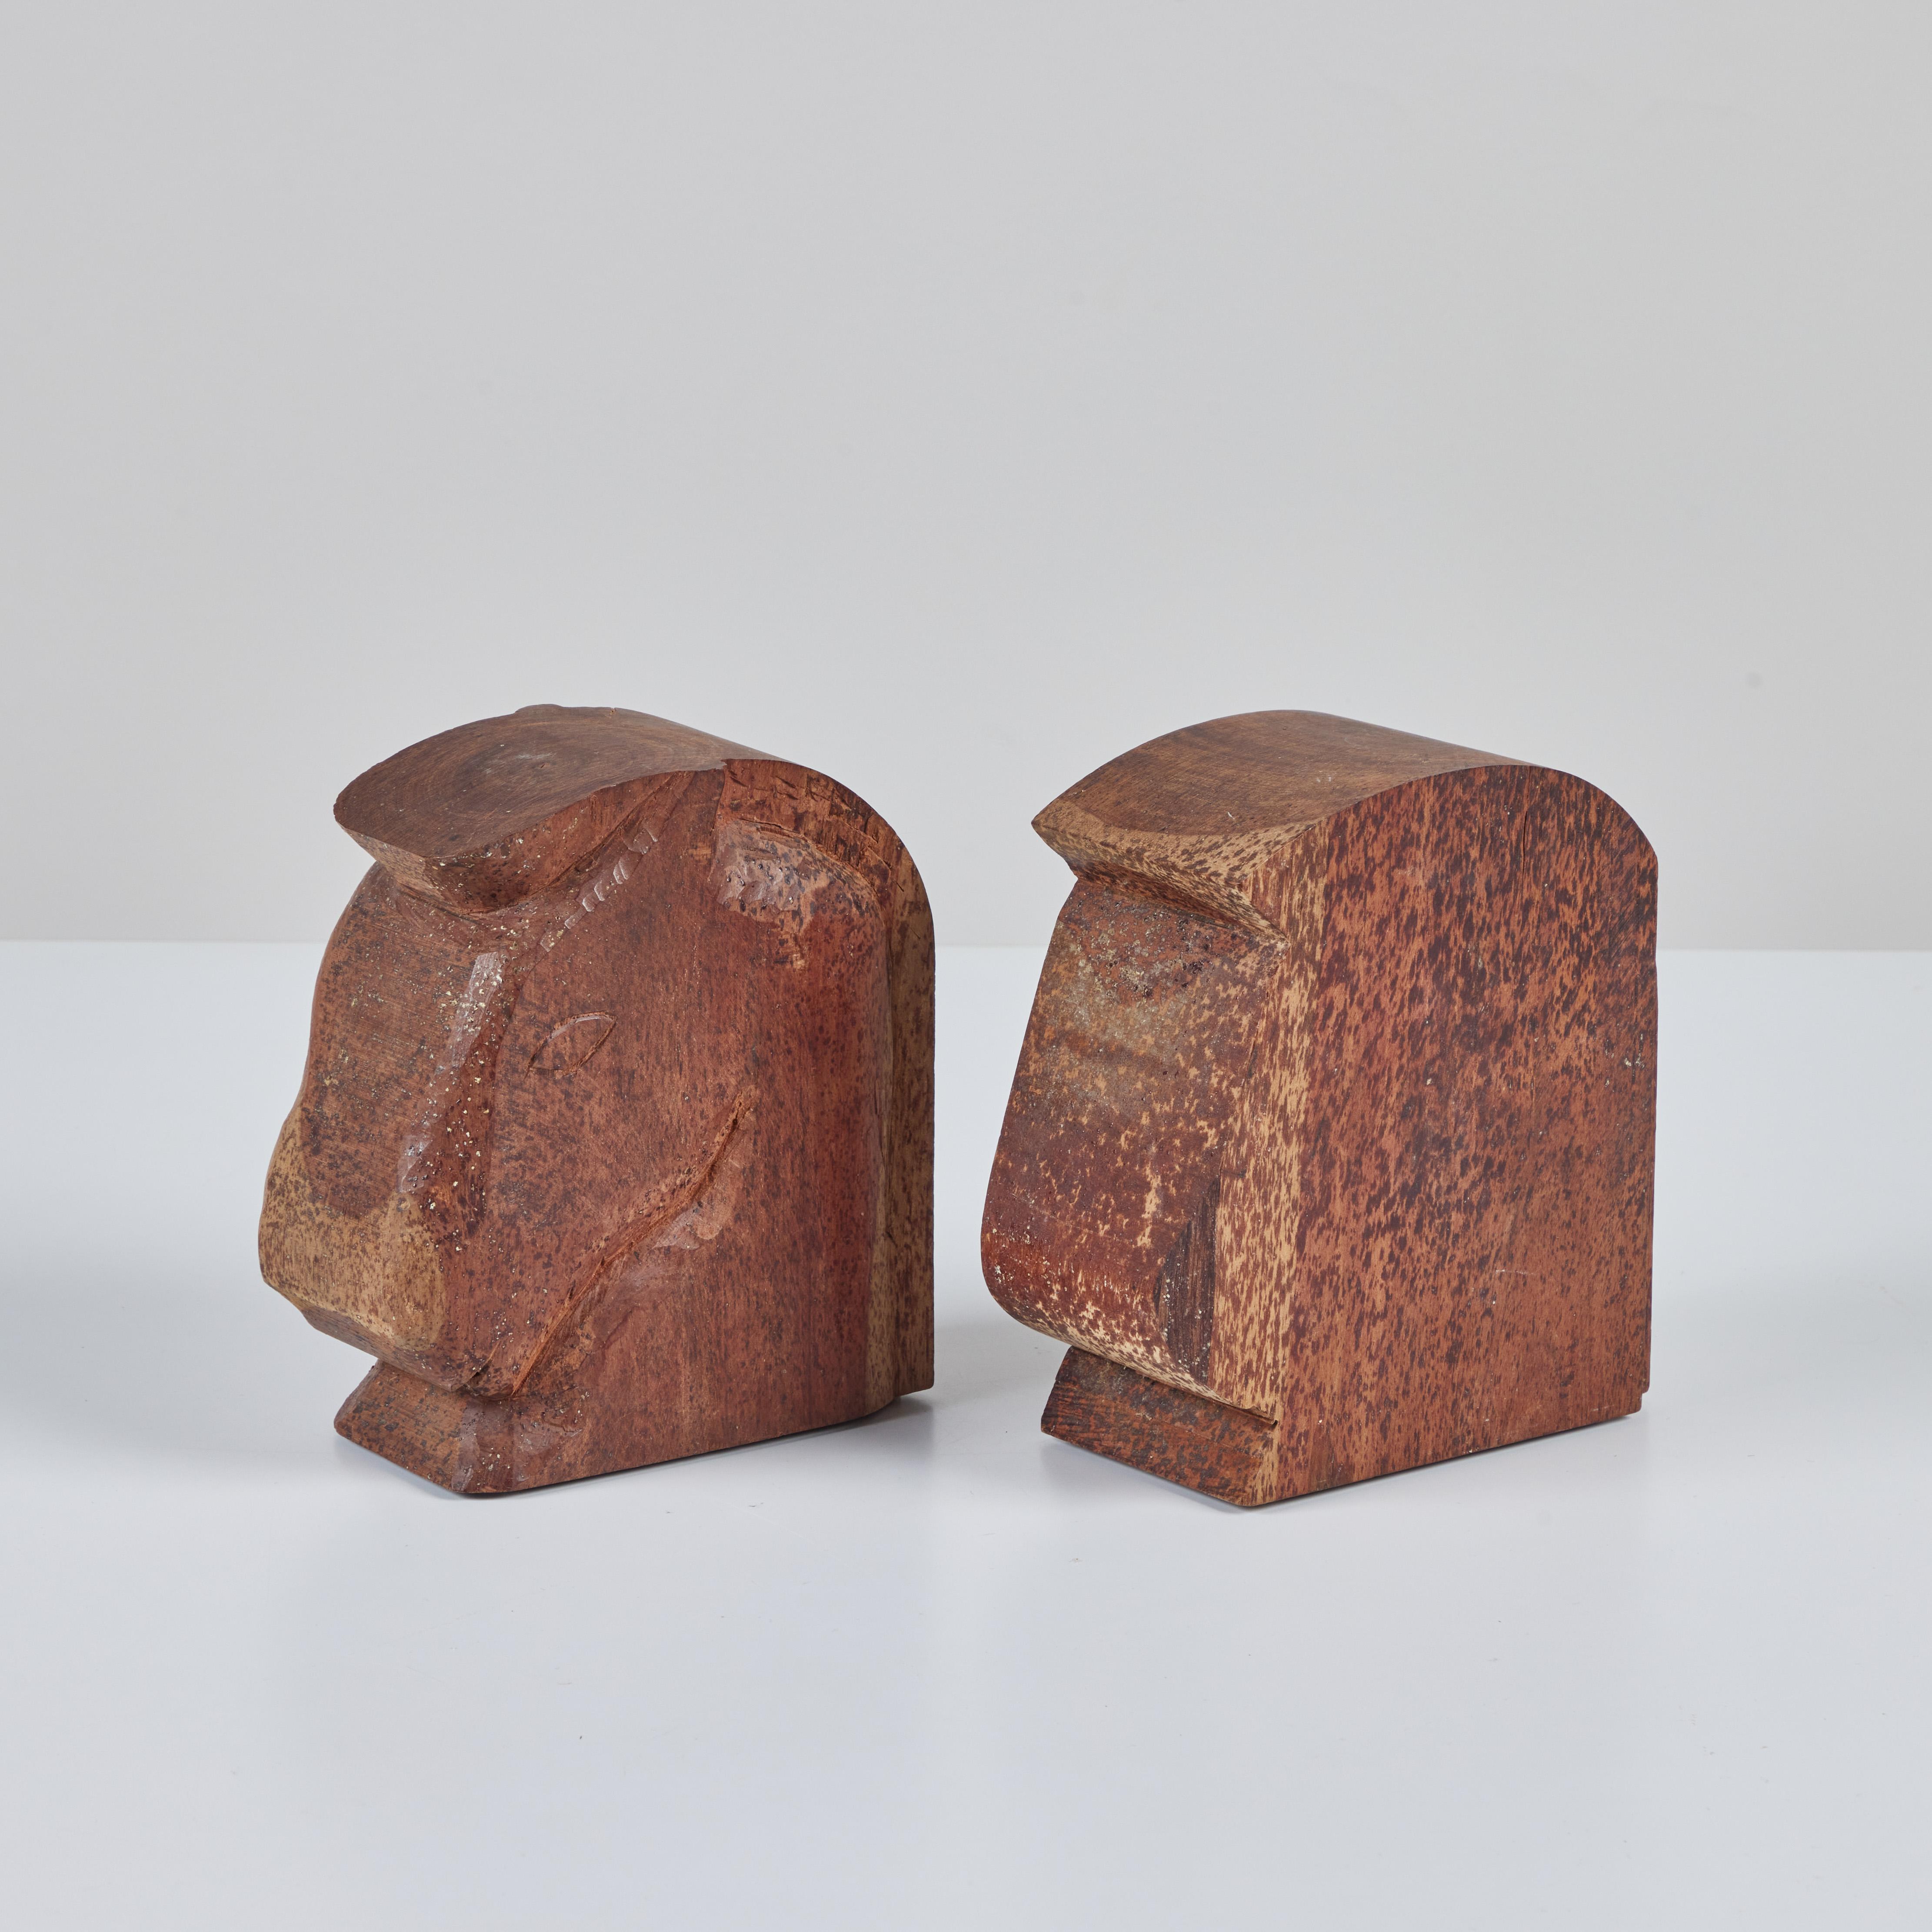 Hand-Carved Pair of Wood Horse Head Bookends